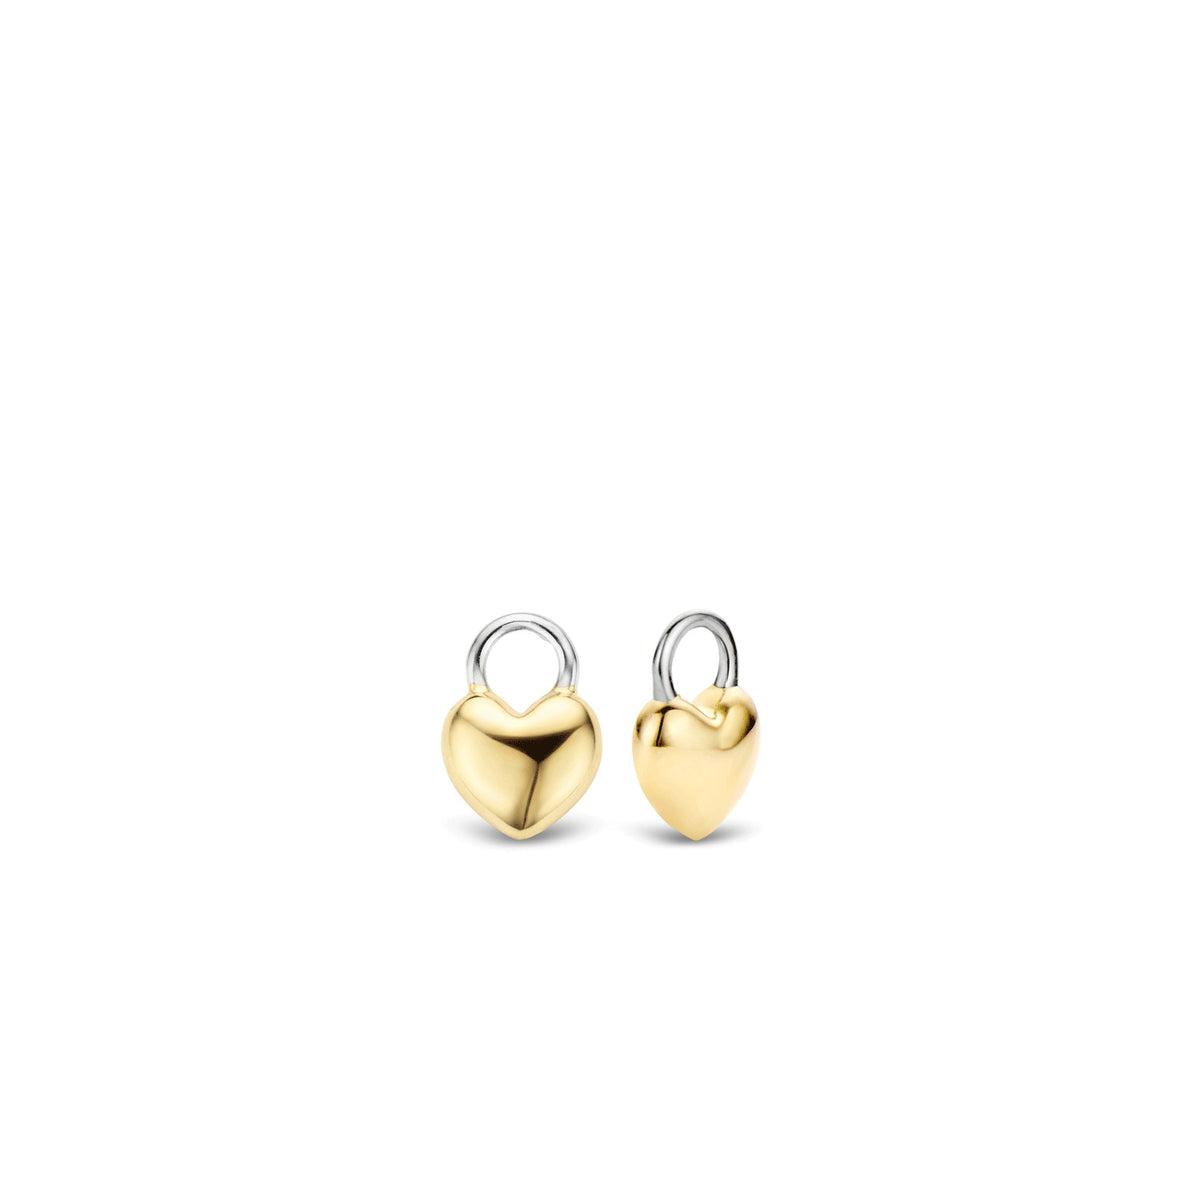 TI SENTO Sterling Silver Gold Tone Heart Ear Charms